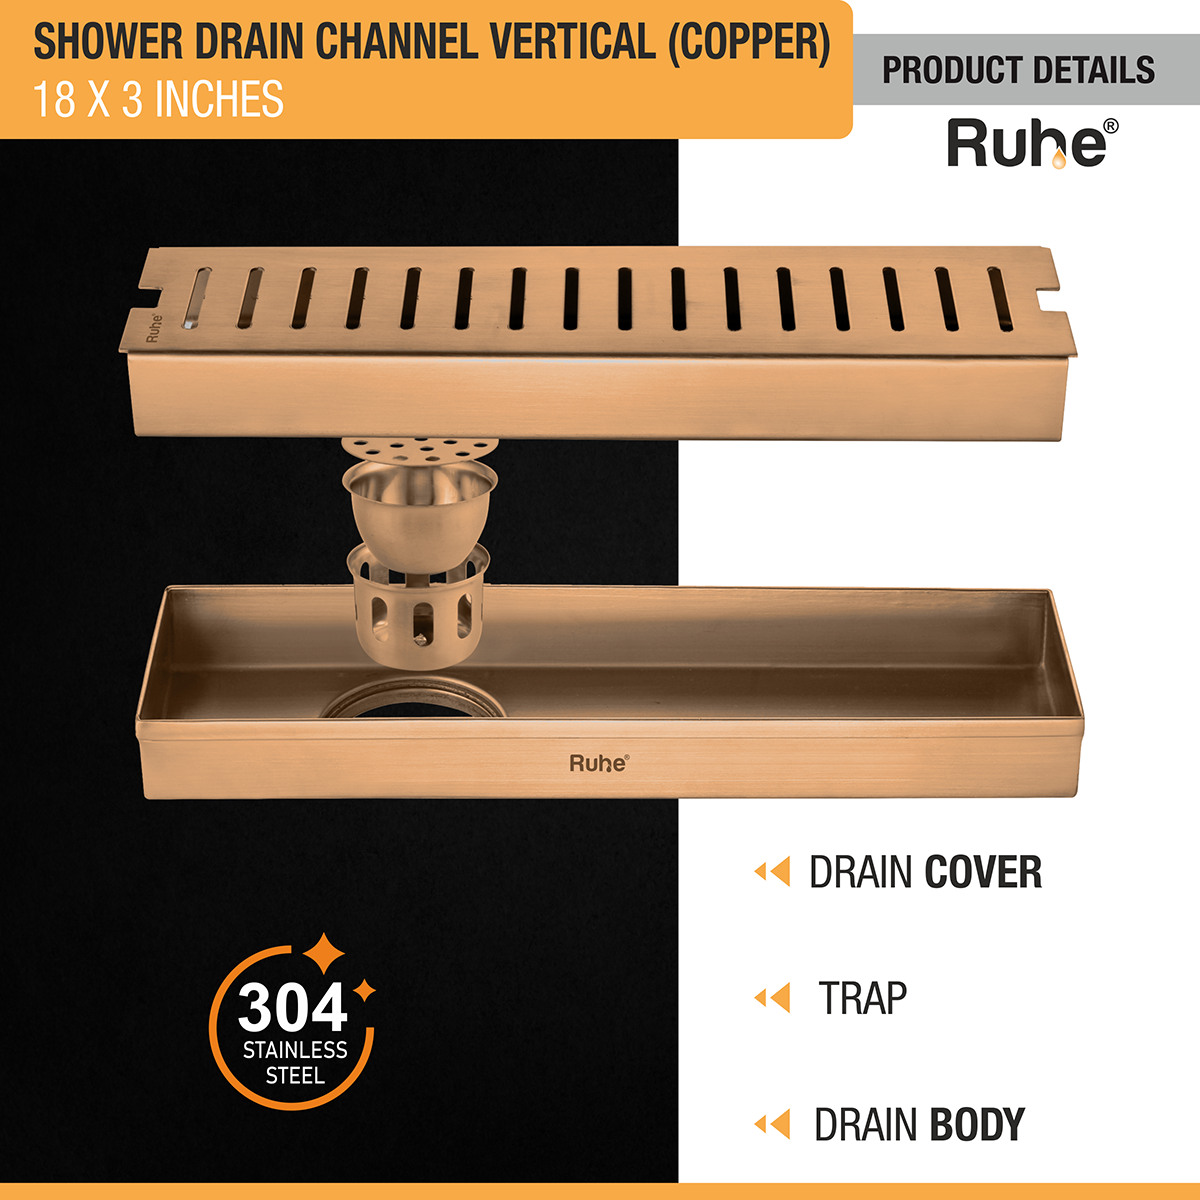 Vertical Shower Drain Channel (18 x 3 Inches) ROSE GOLD/ANTIQUE COPPER product details